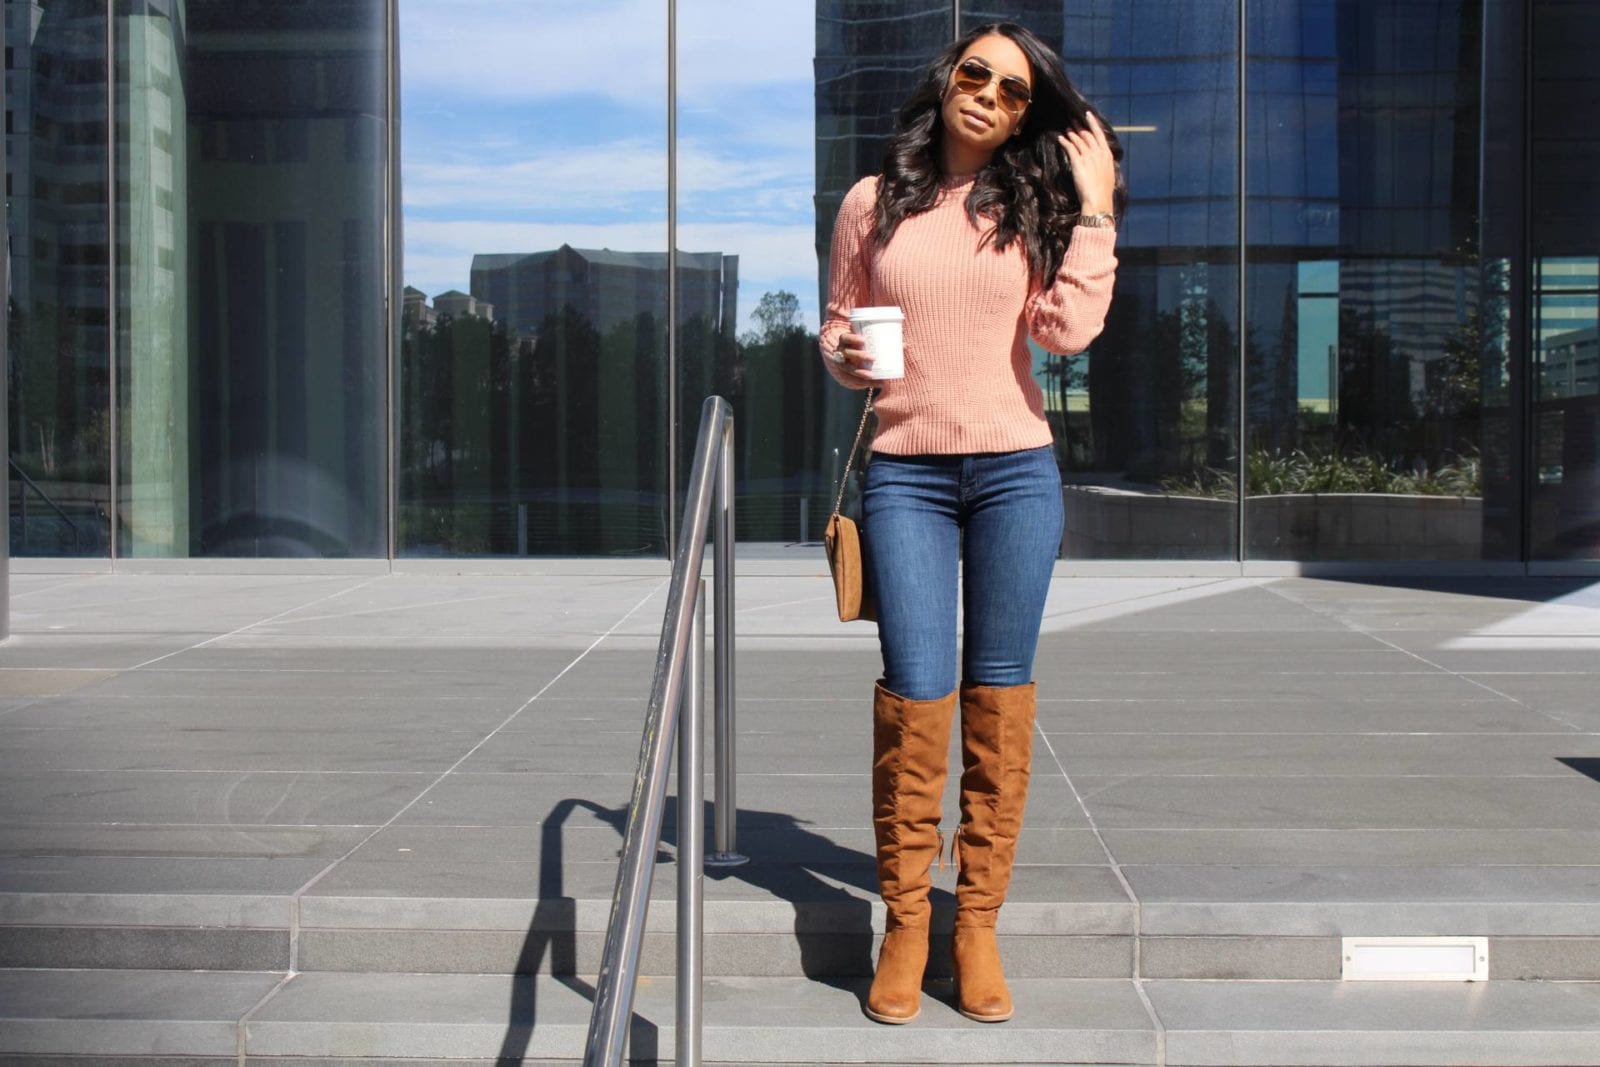 Chunky Knit H&M Sweater, Dolce Vita Over The Knee Boots | The B Werd